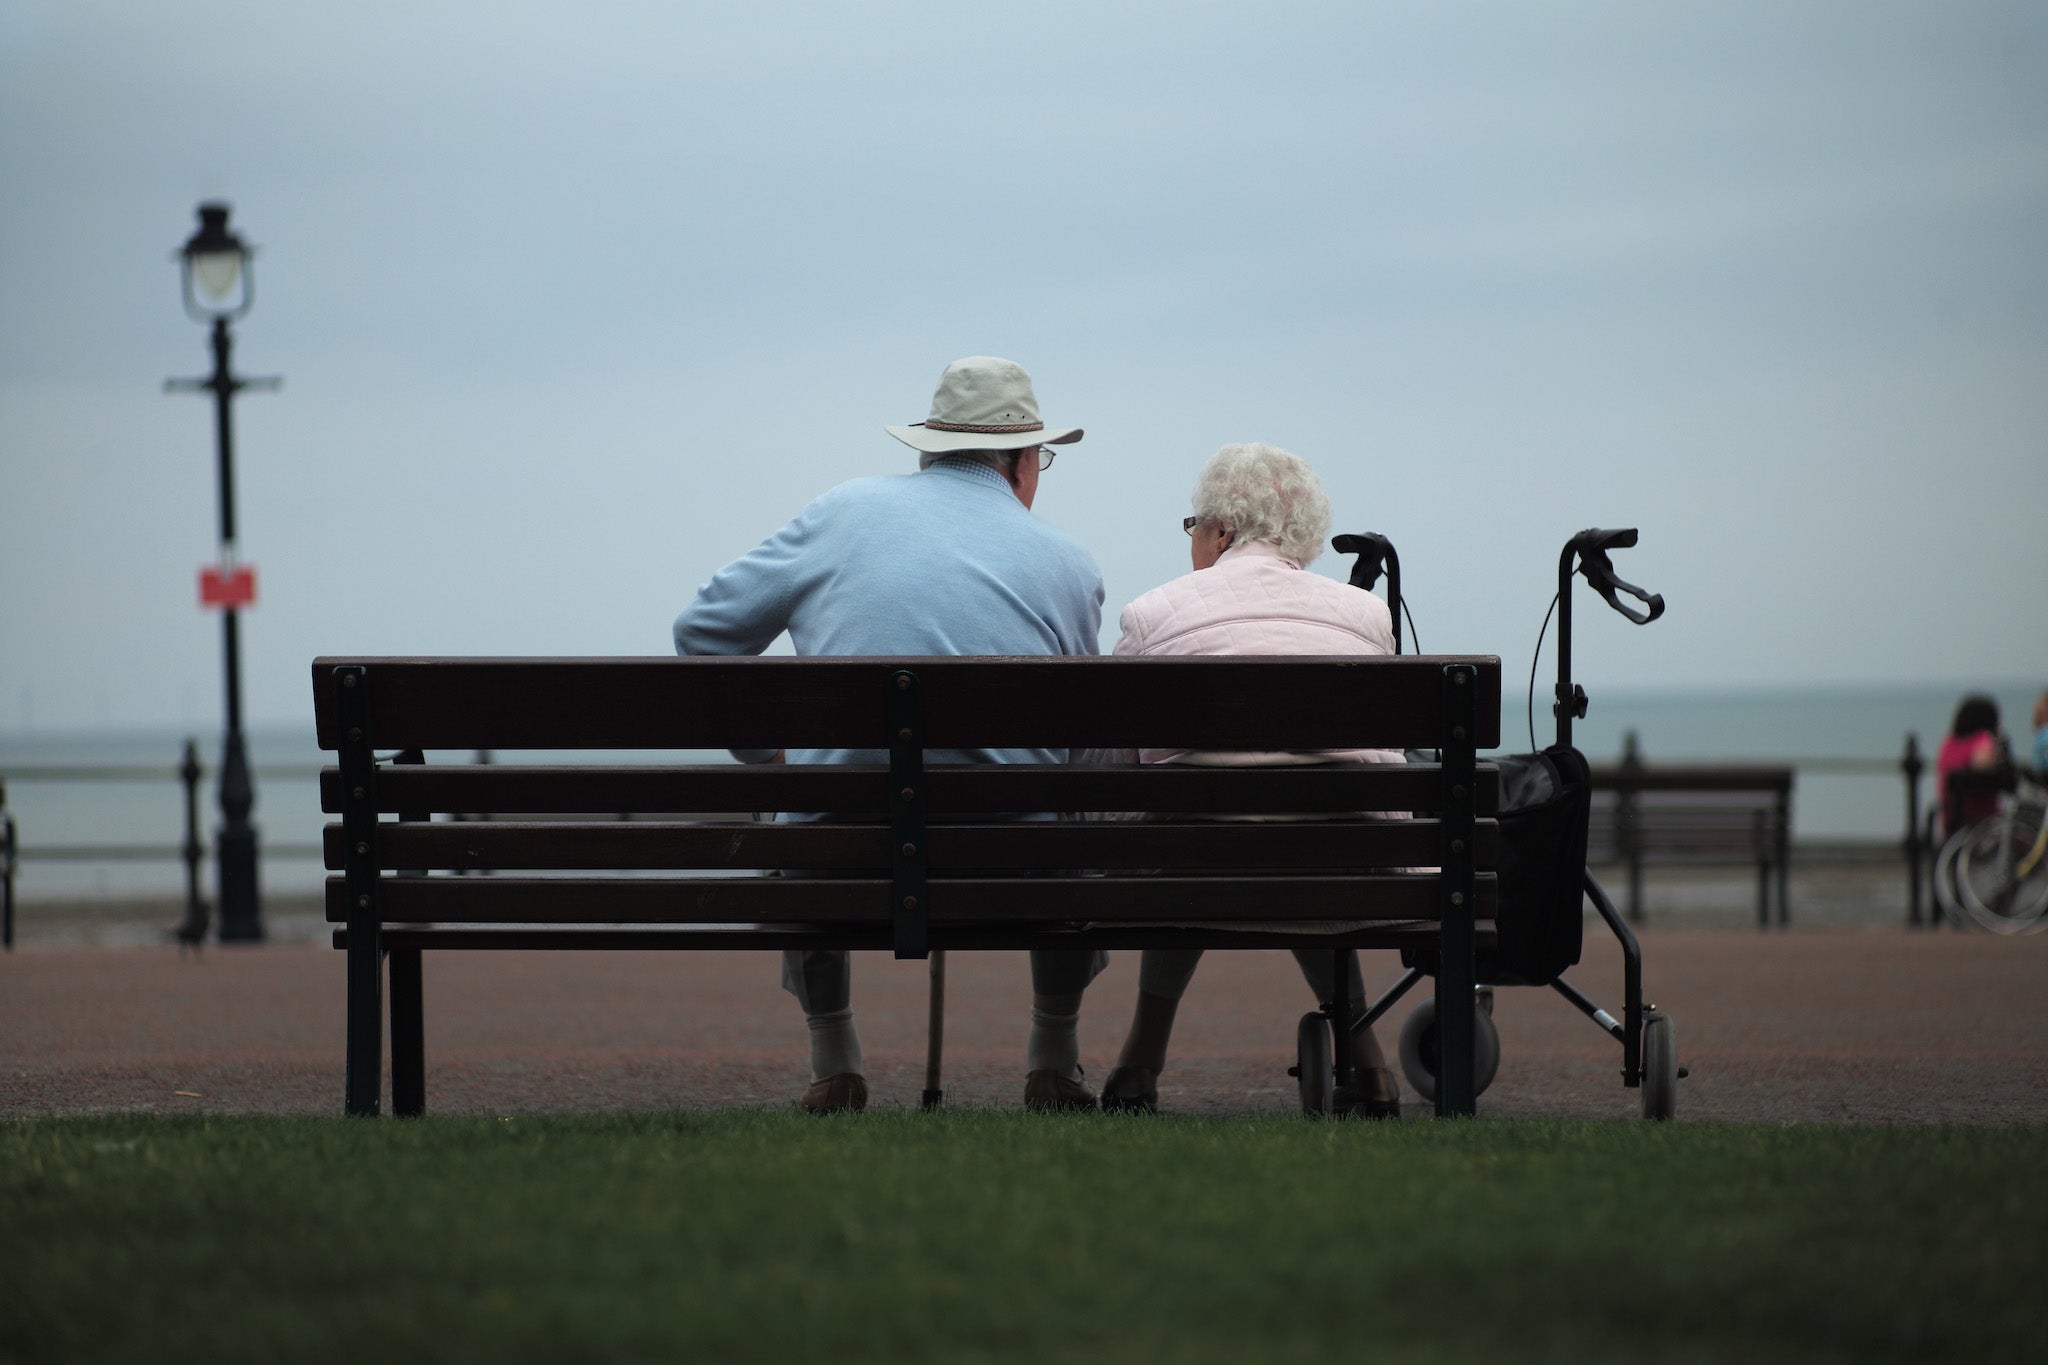 The new state pension will increase from £9,339 per year to around £9,628